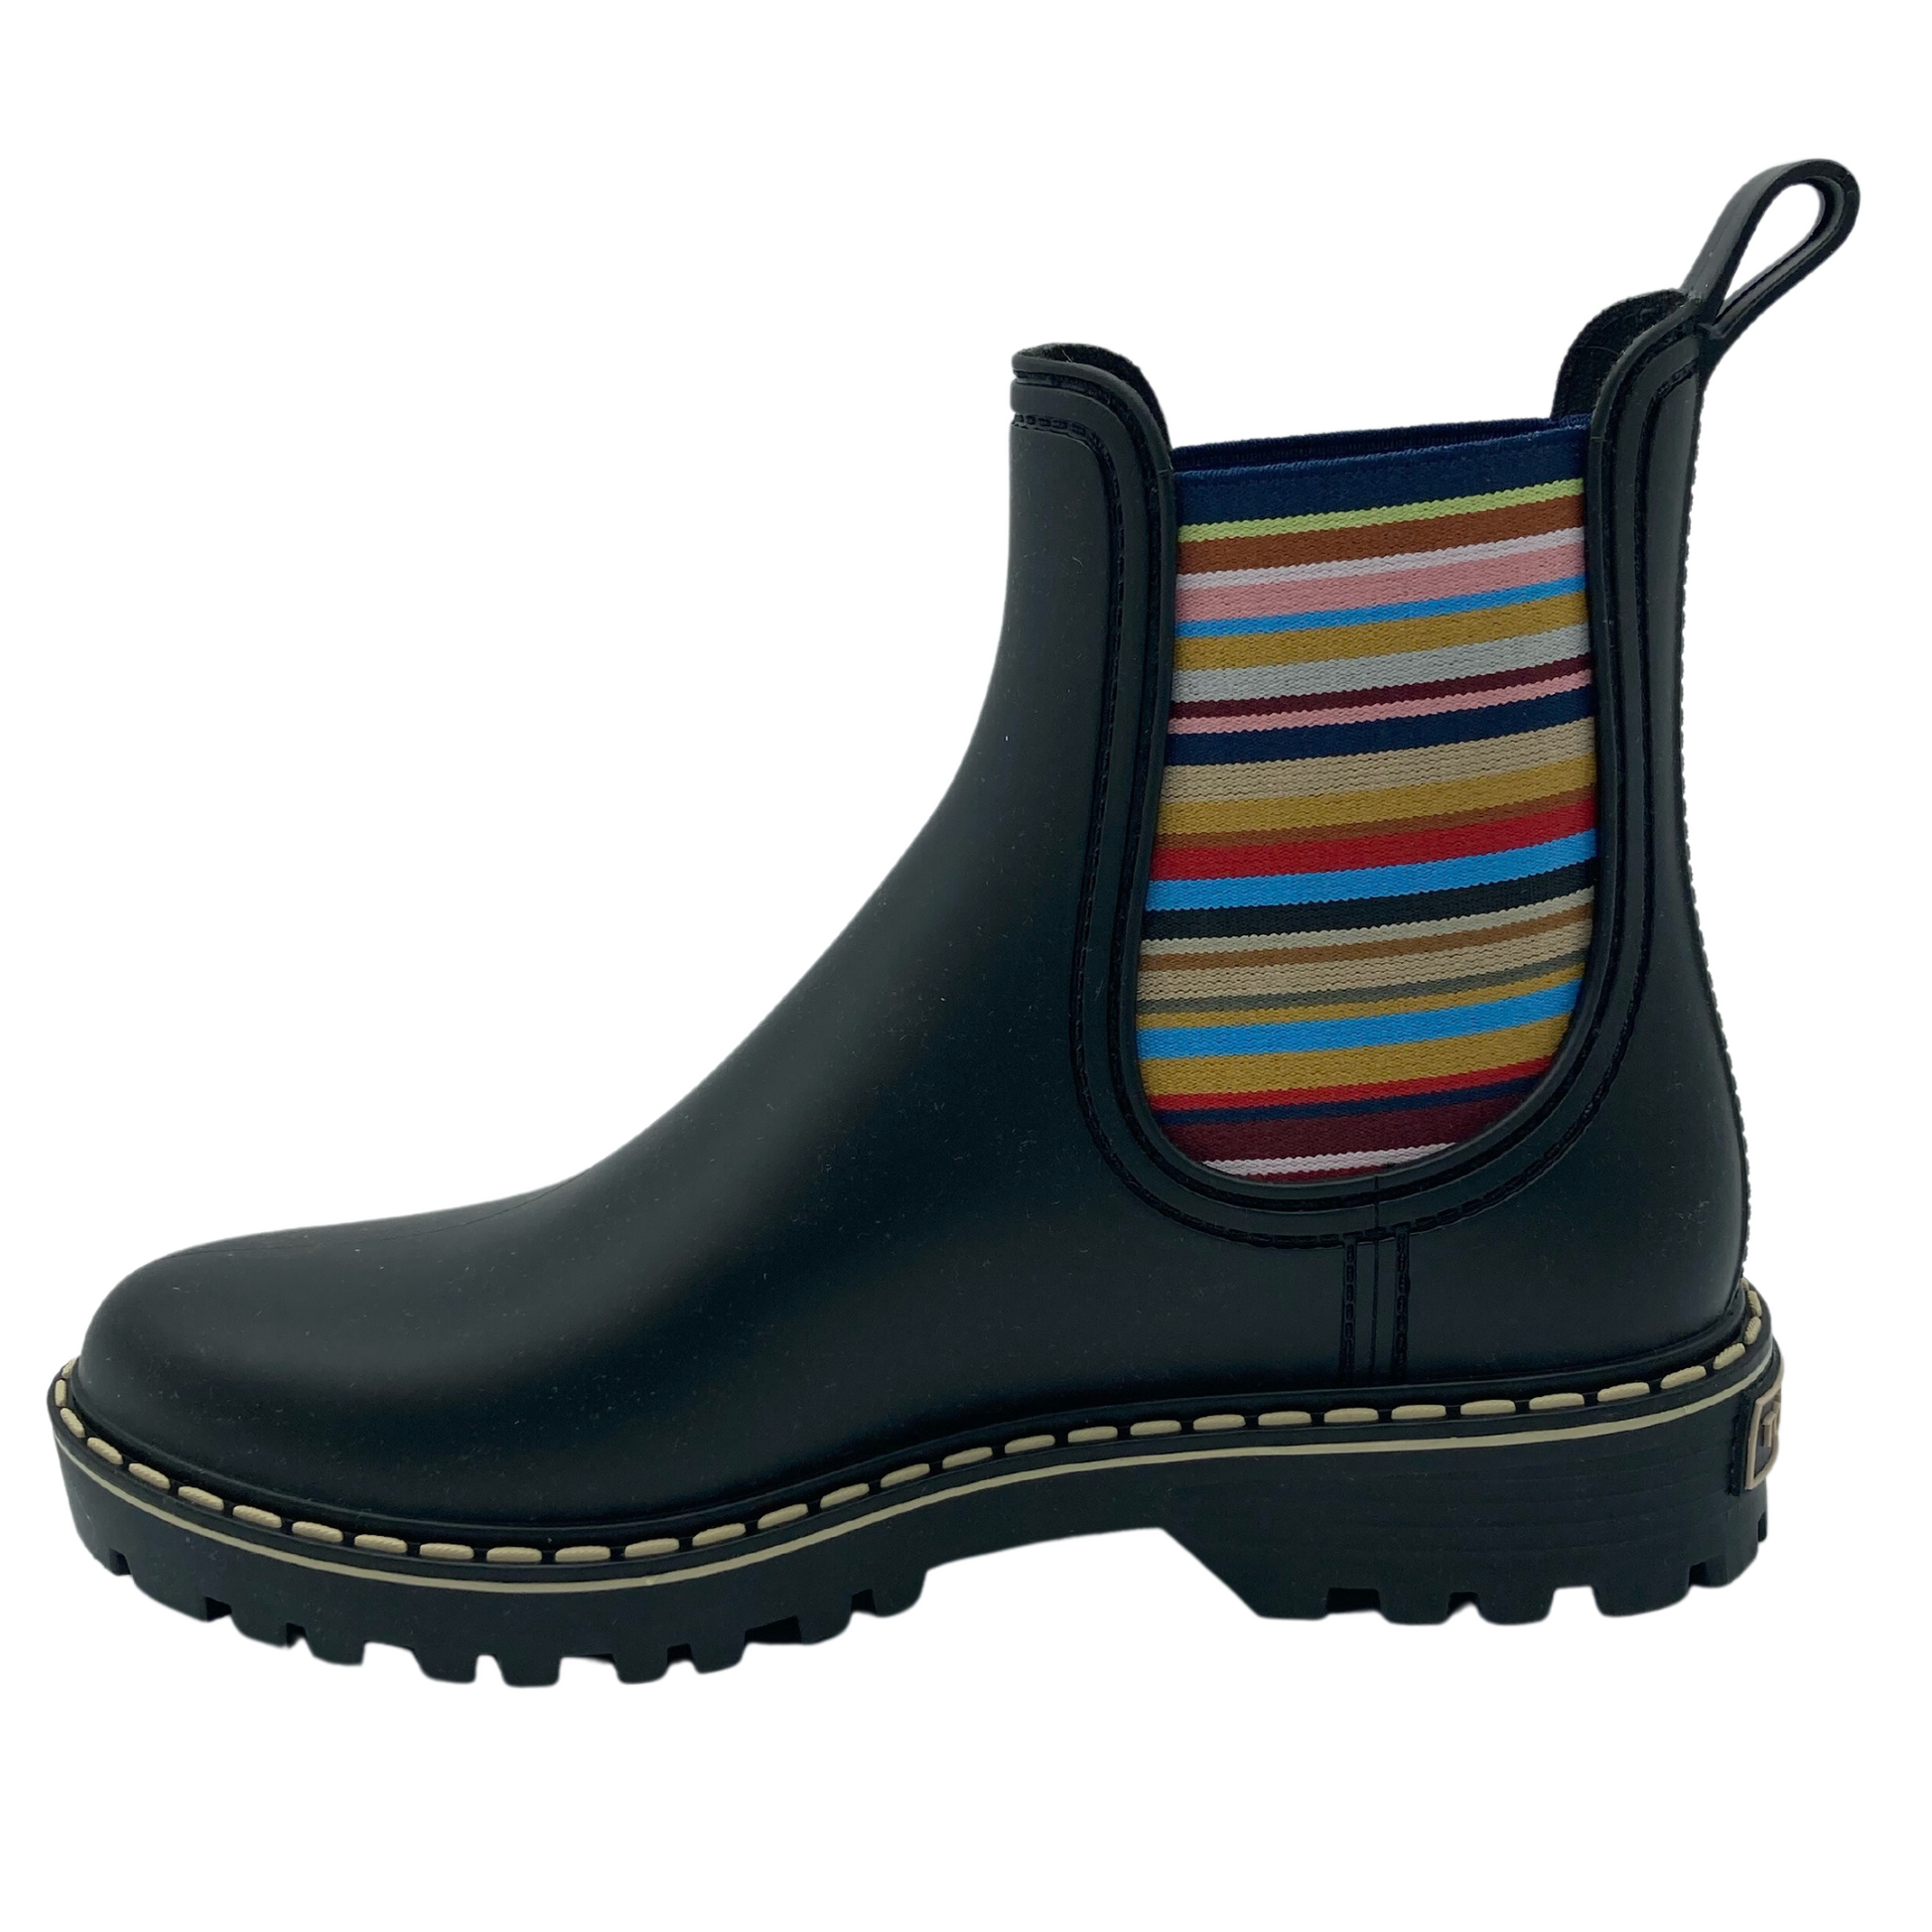 Left facing view of black rain boot with black rubber outsole and multicoloured elastic side gore